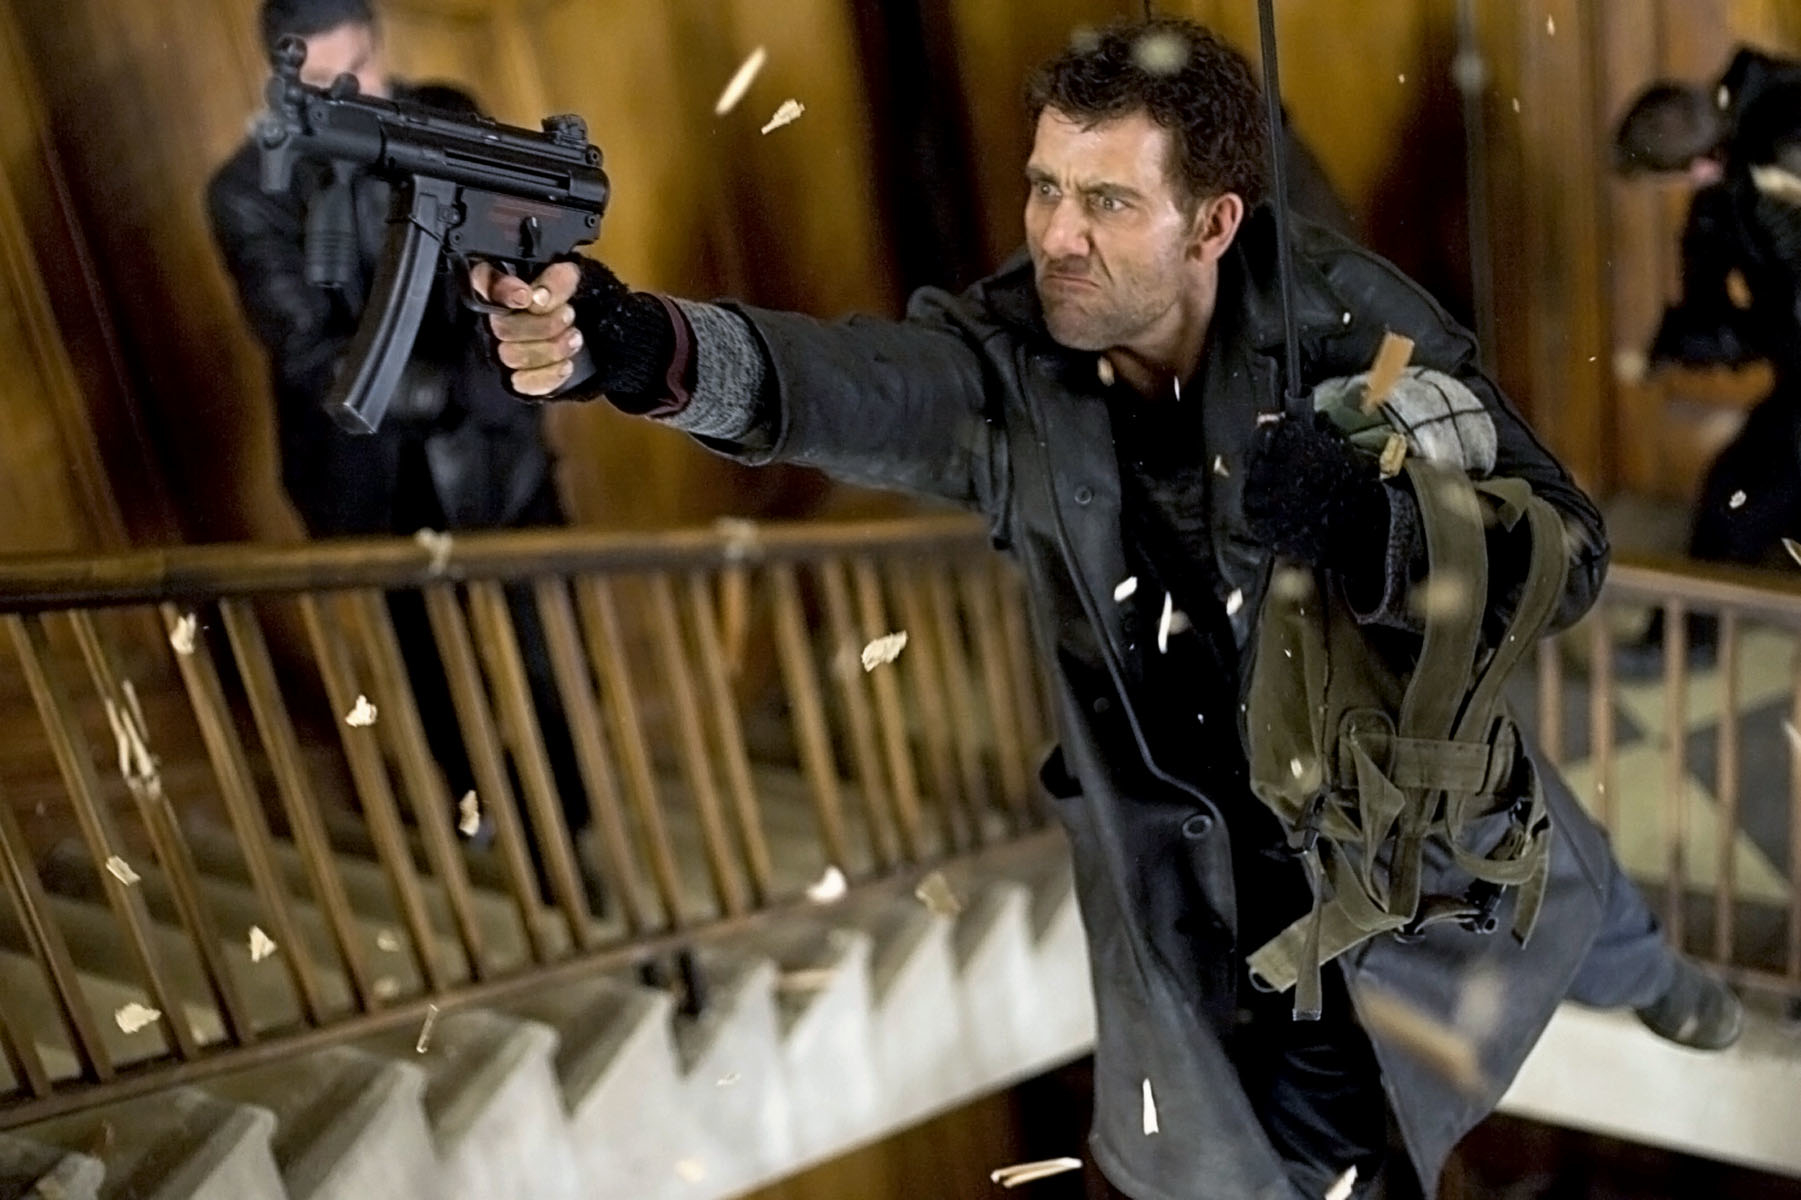 Man in action pose with gun, police in background, in intense movie scene